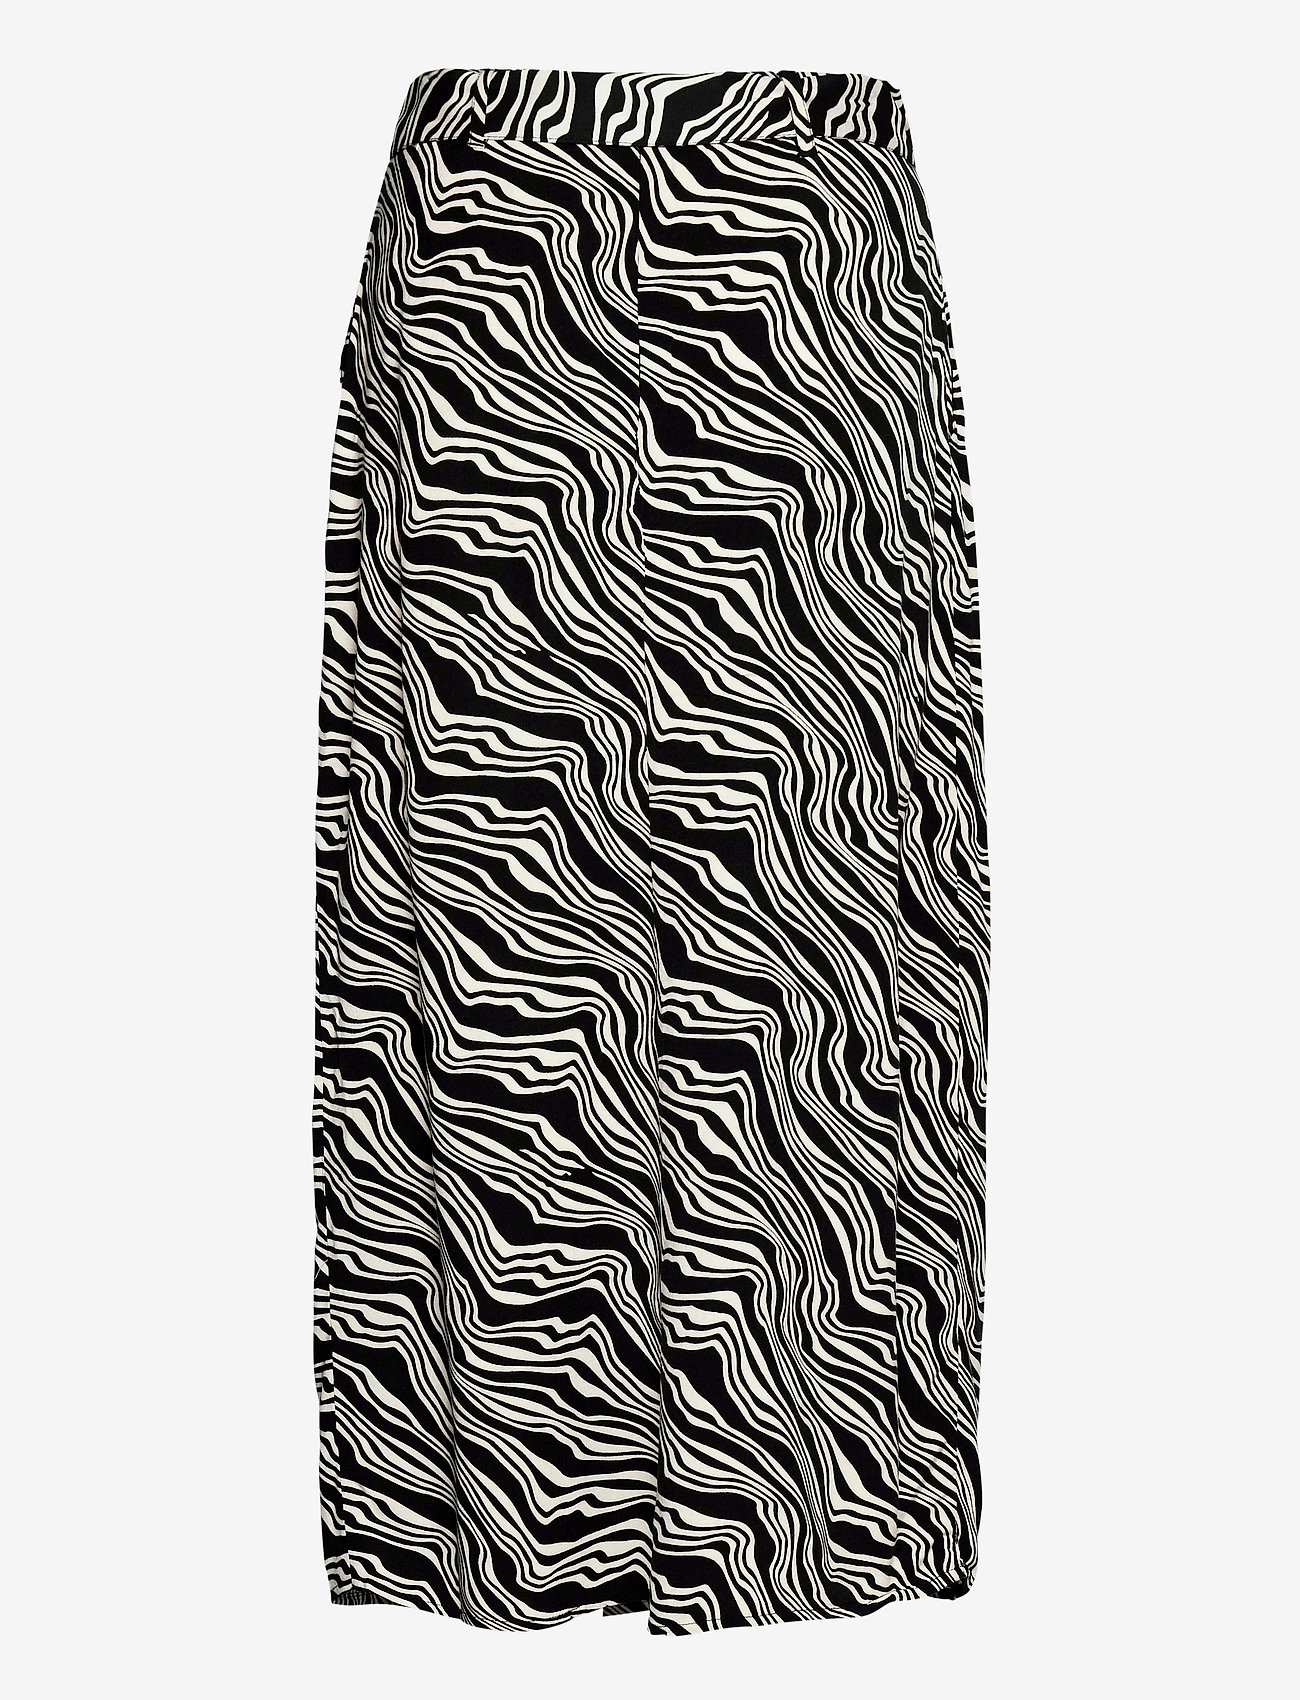 Tom Tailor - skirt with with wrap detail - maxi skirts - black wavy design - 1